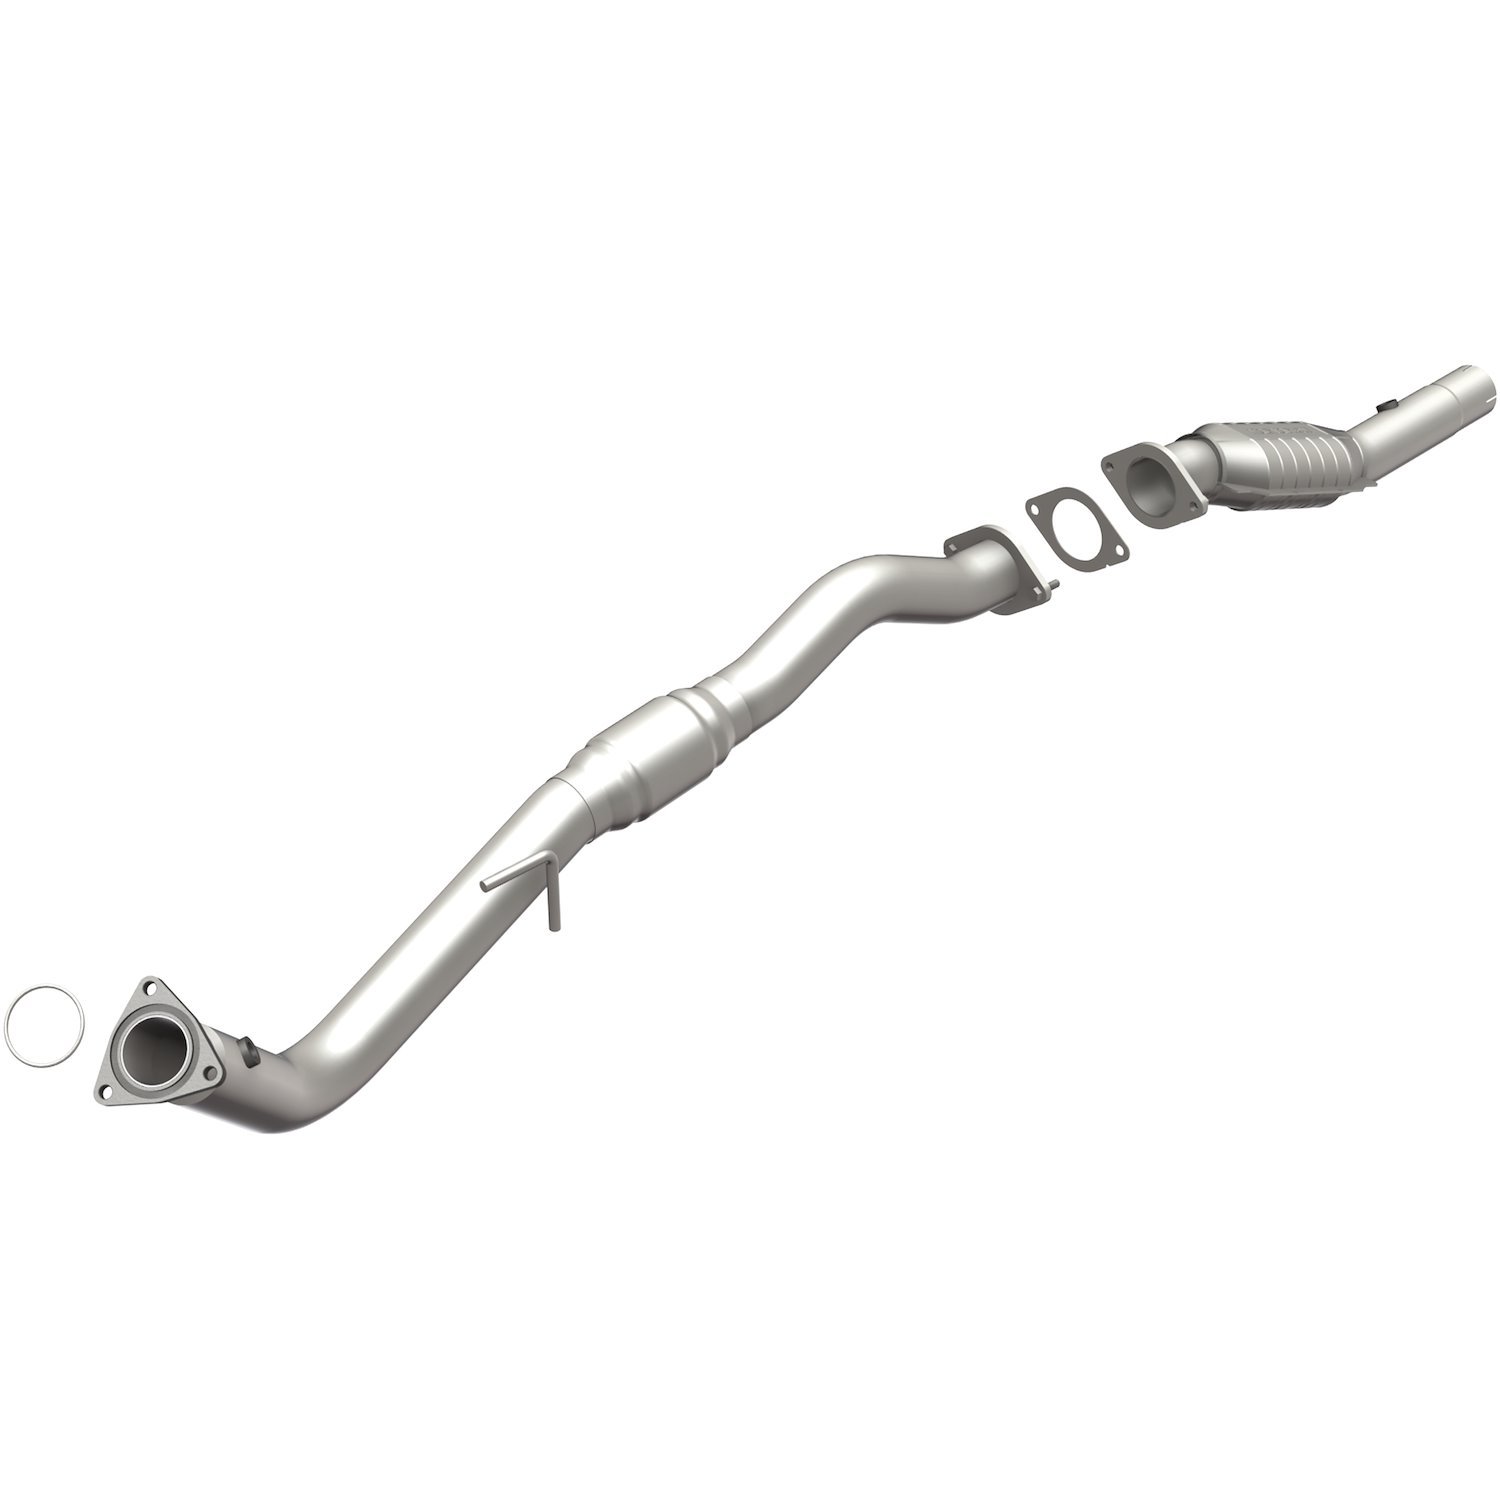 Direct-Fit Catalytic Converter 2003-06 Chevy/GMC Pickup 1500, V8 6.0L